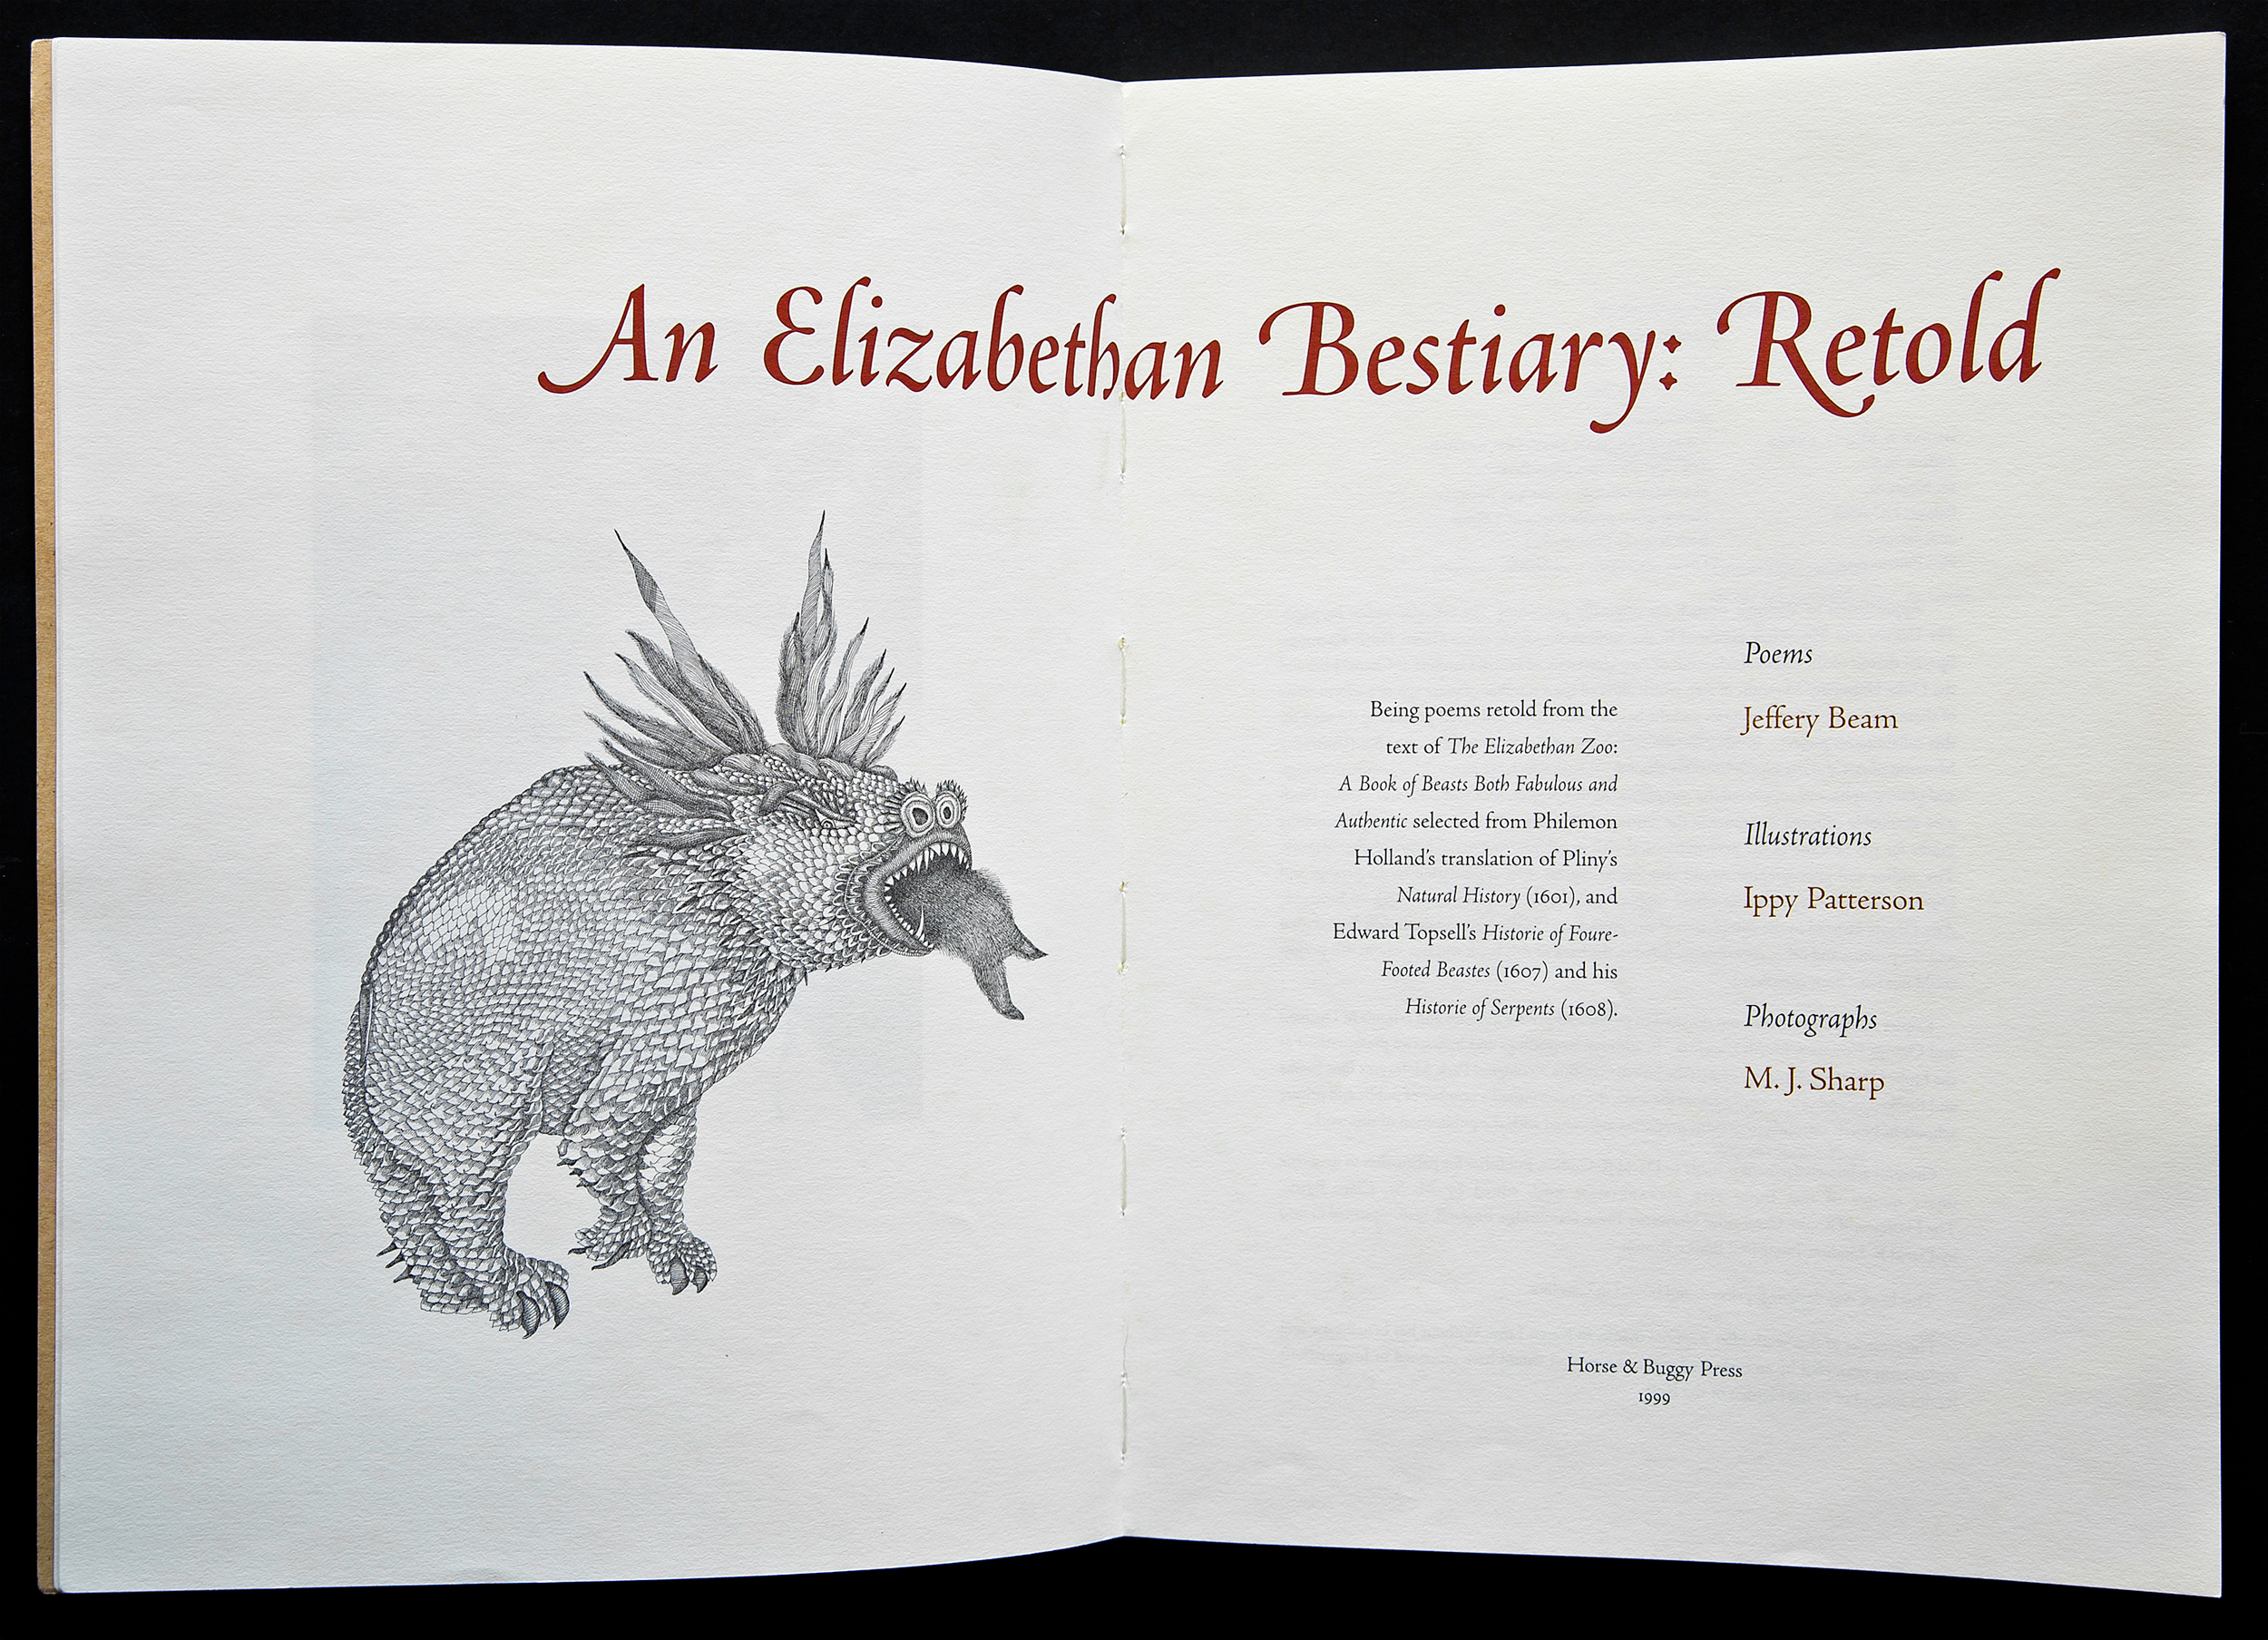  Title spread shows off the swash caps to be seen on successive pages and readers will notice a congruence between the shapes of the serifs and the details in the drawings of the various beasts. 